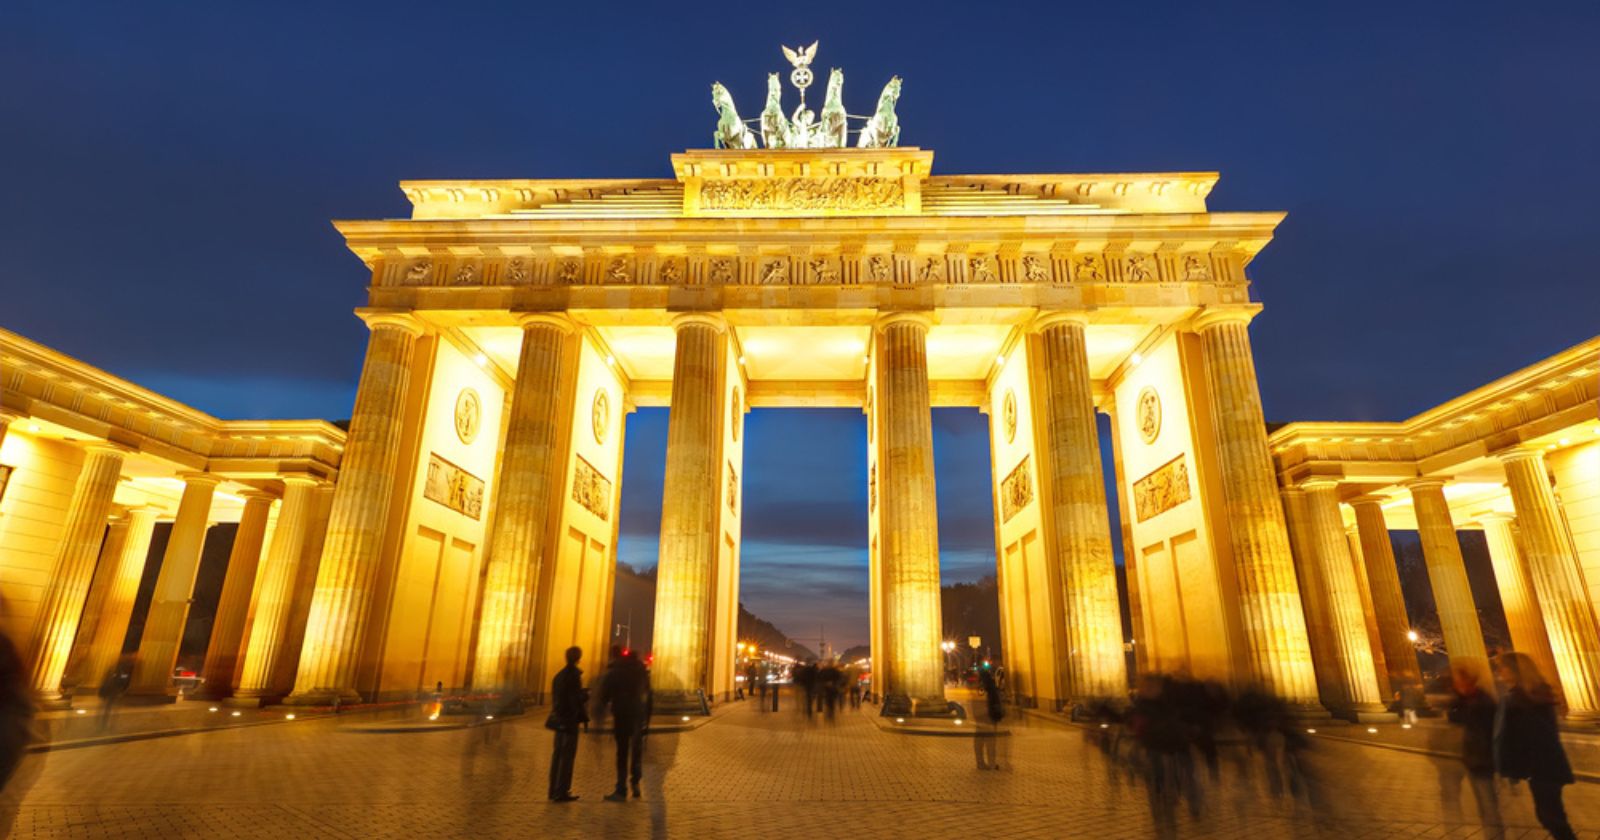 Berlin will no longer illuminate certain monuments at night to save energy